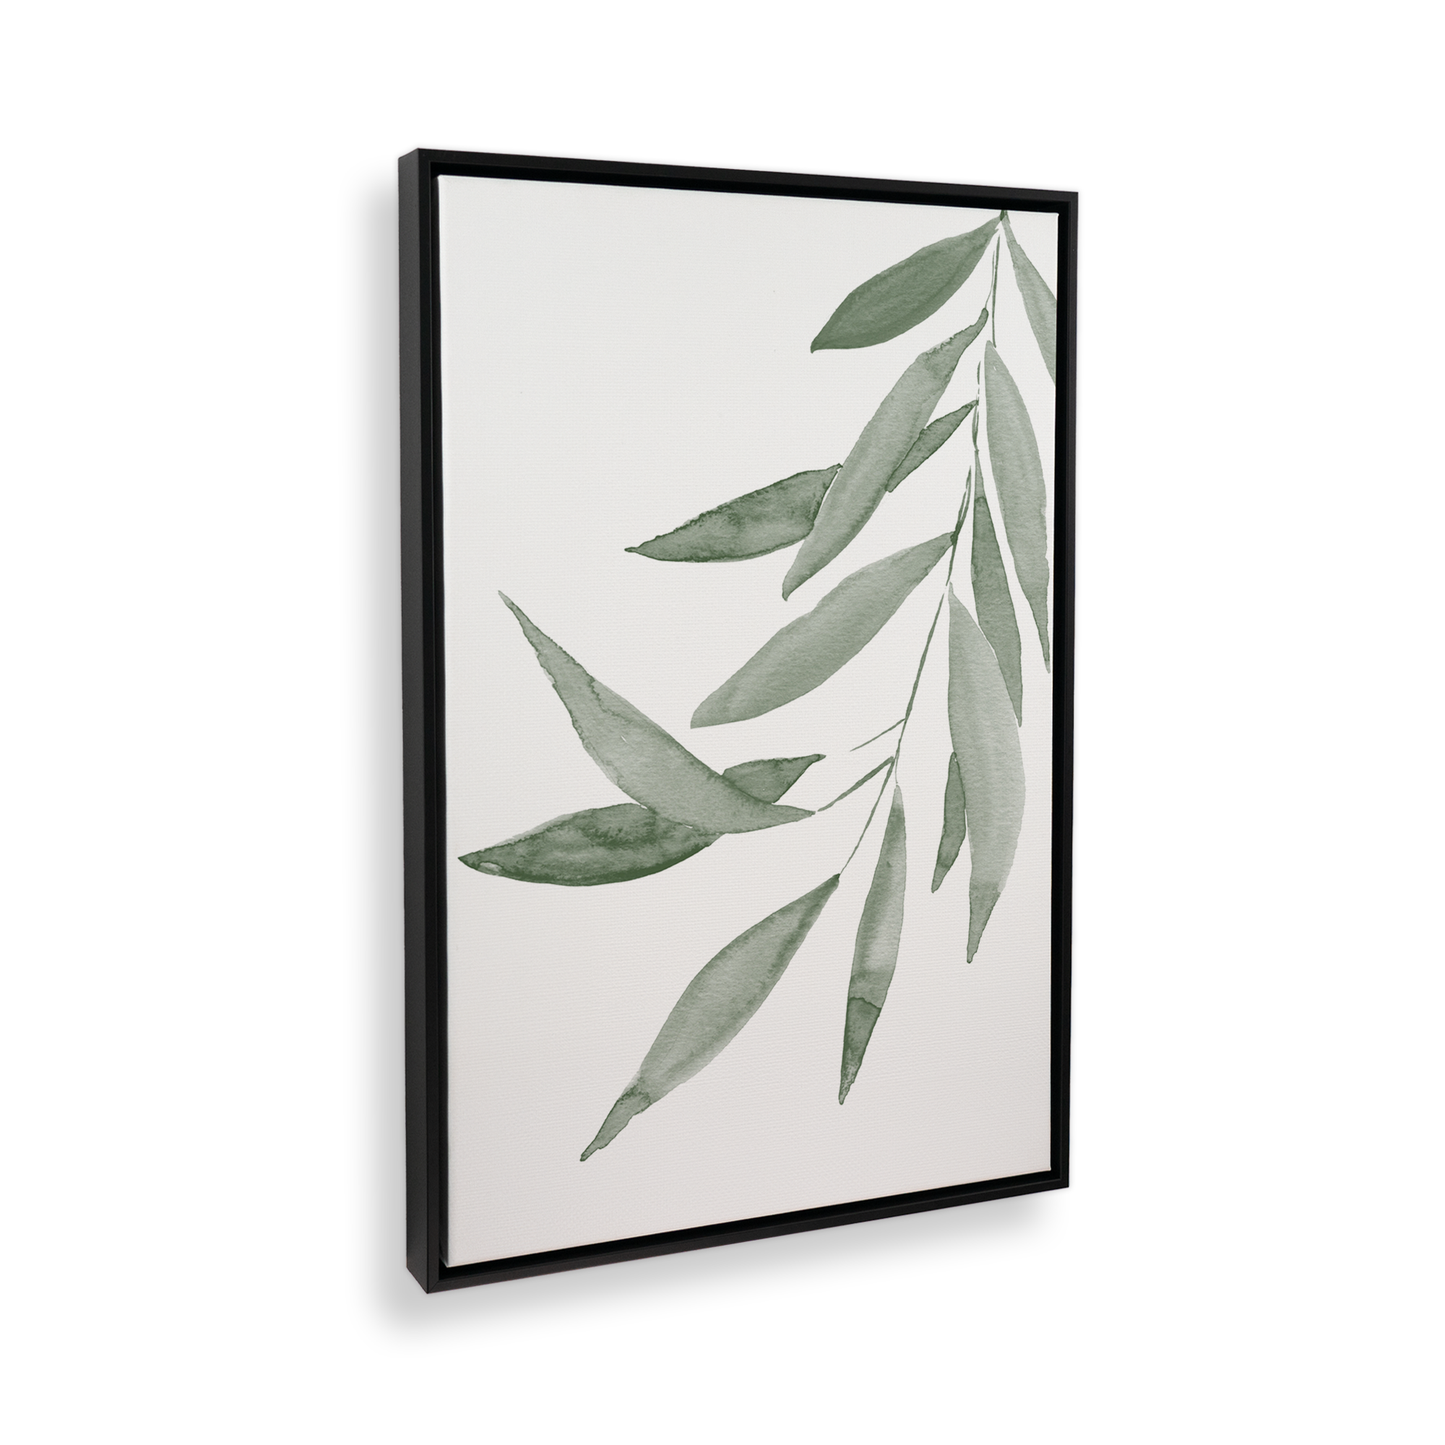 [color:Satin Black], Picture of art in a black frame at angle